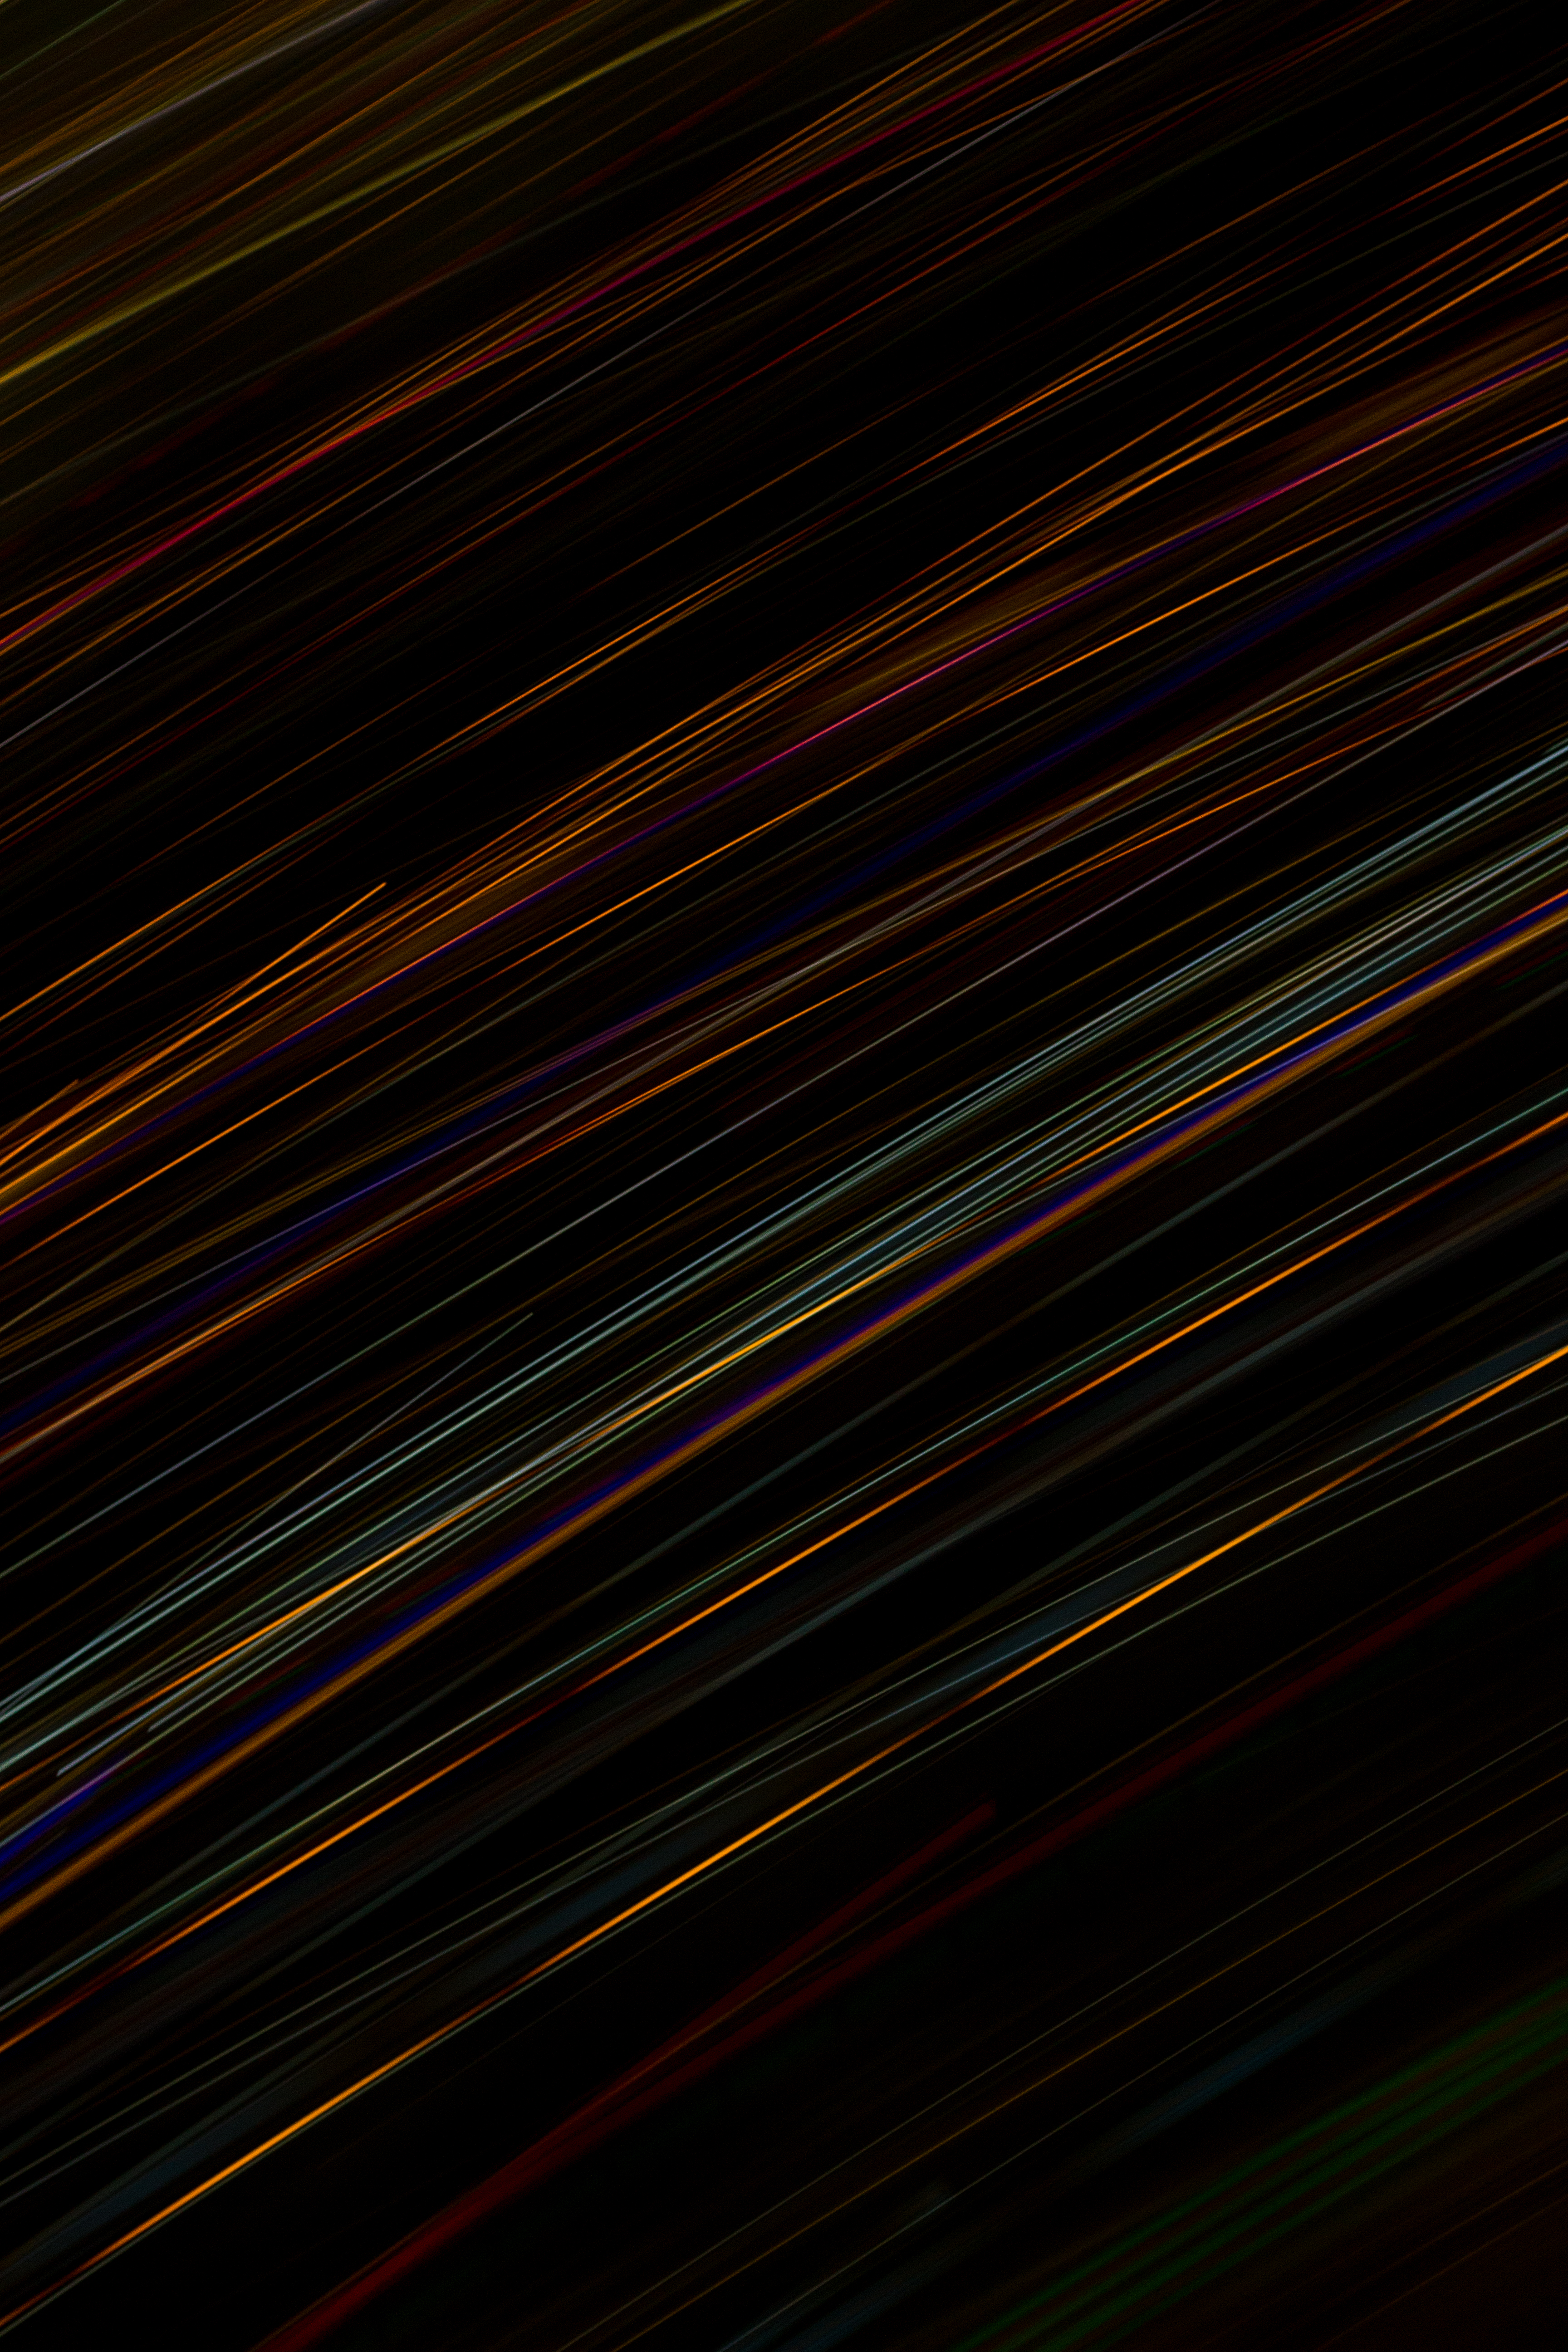 145965 download wallpaper streaks, abstract, dark, multicolored, motley, stripes screensavers and pictures for free